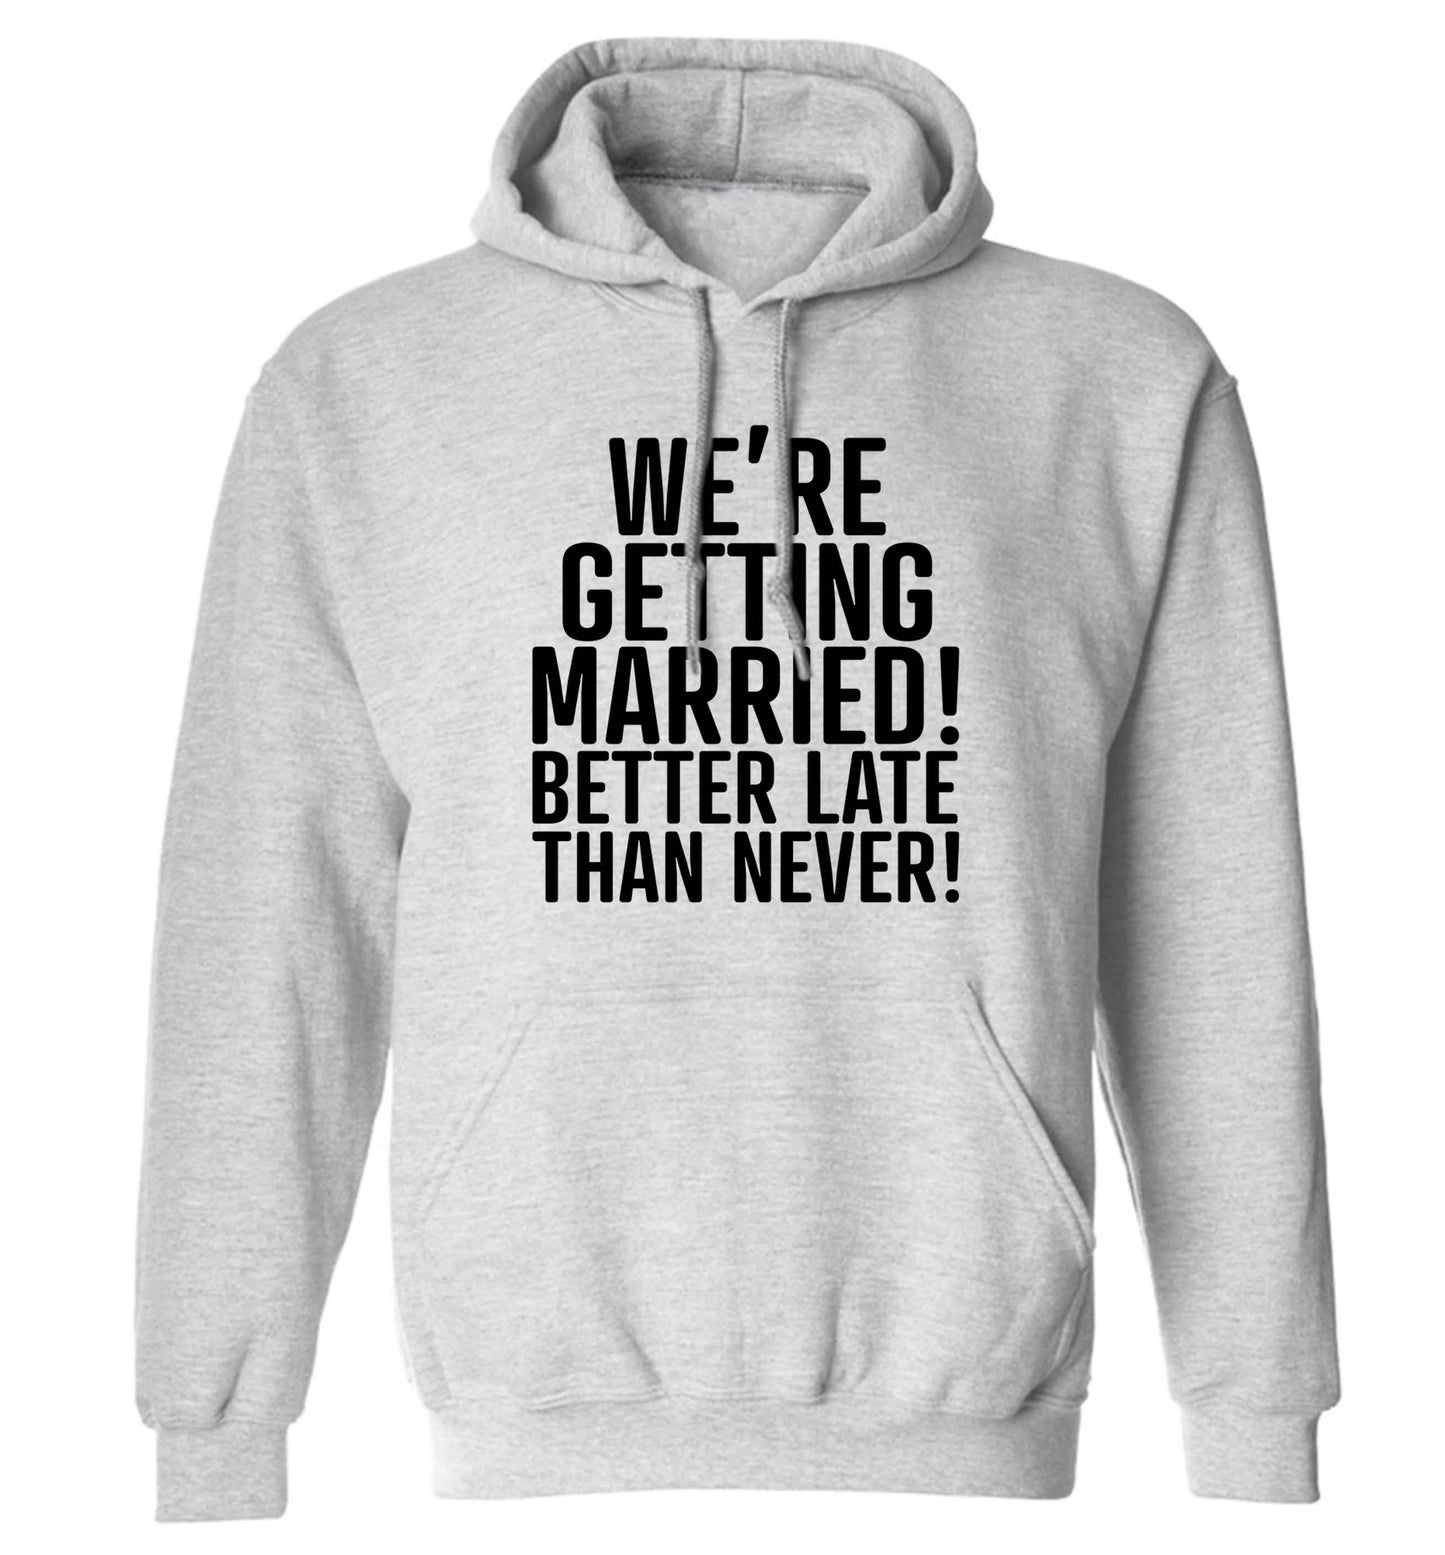 Always the bridesmaid but never the bride? Until now! adults unisex grey hoodie 2XL